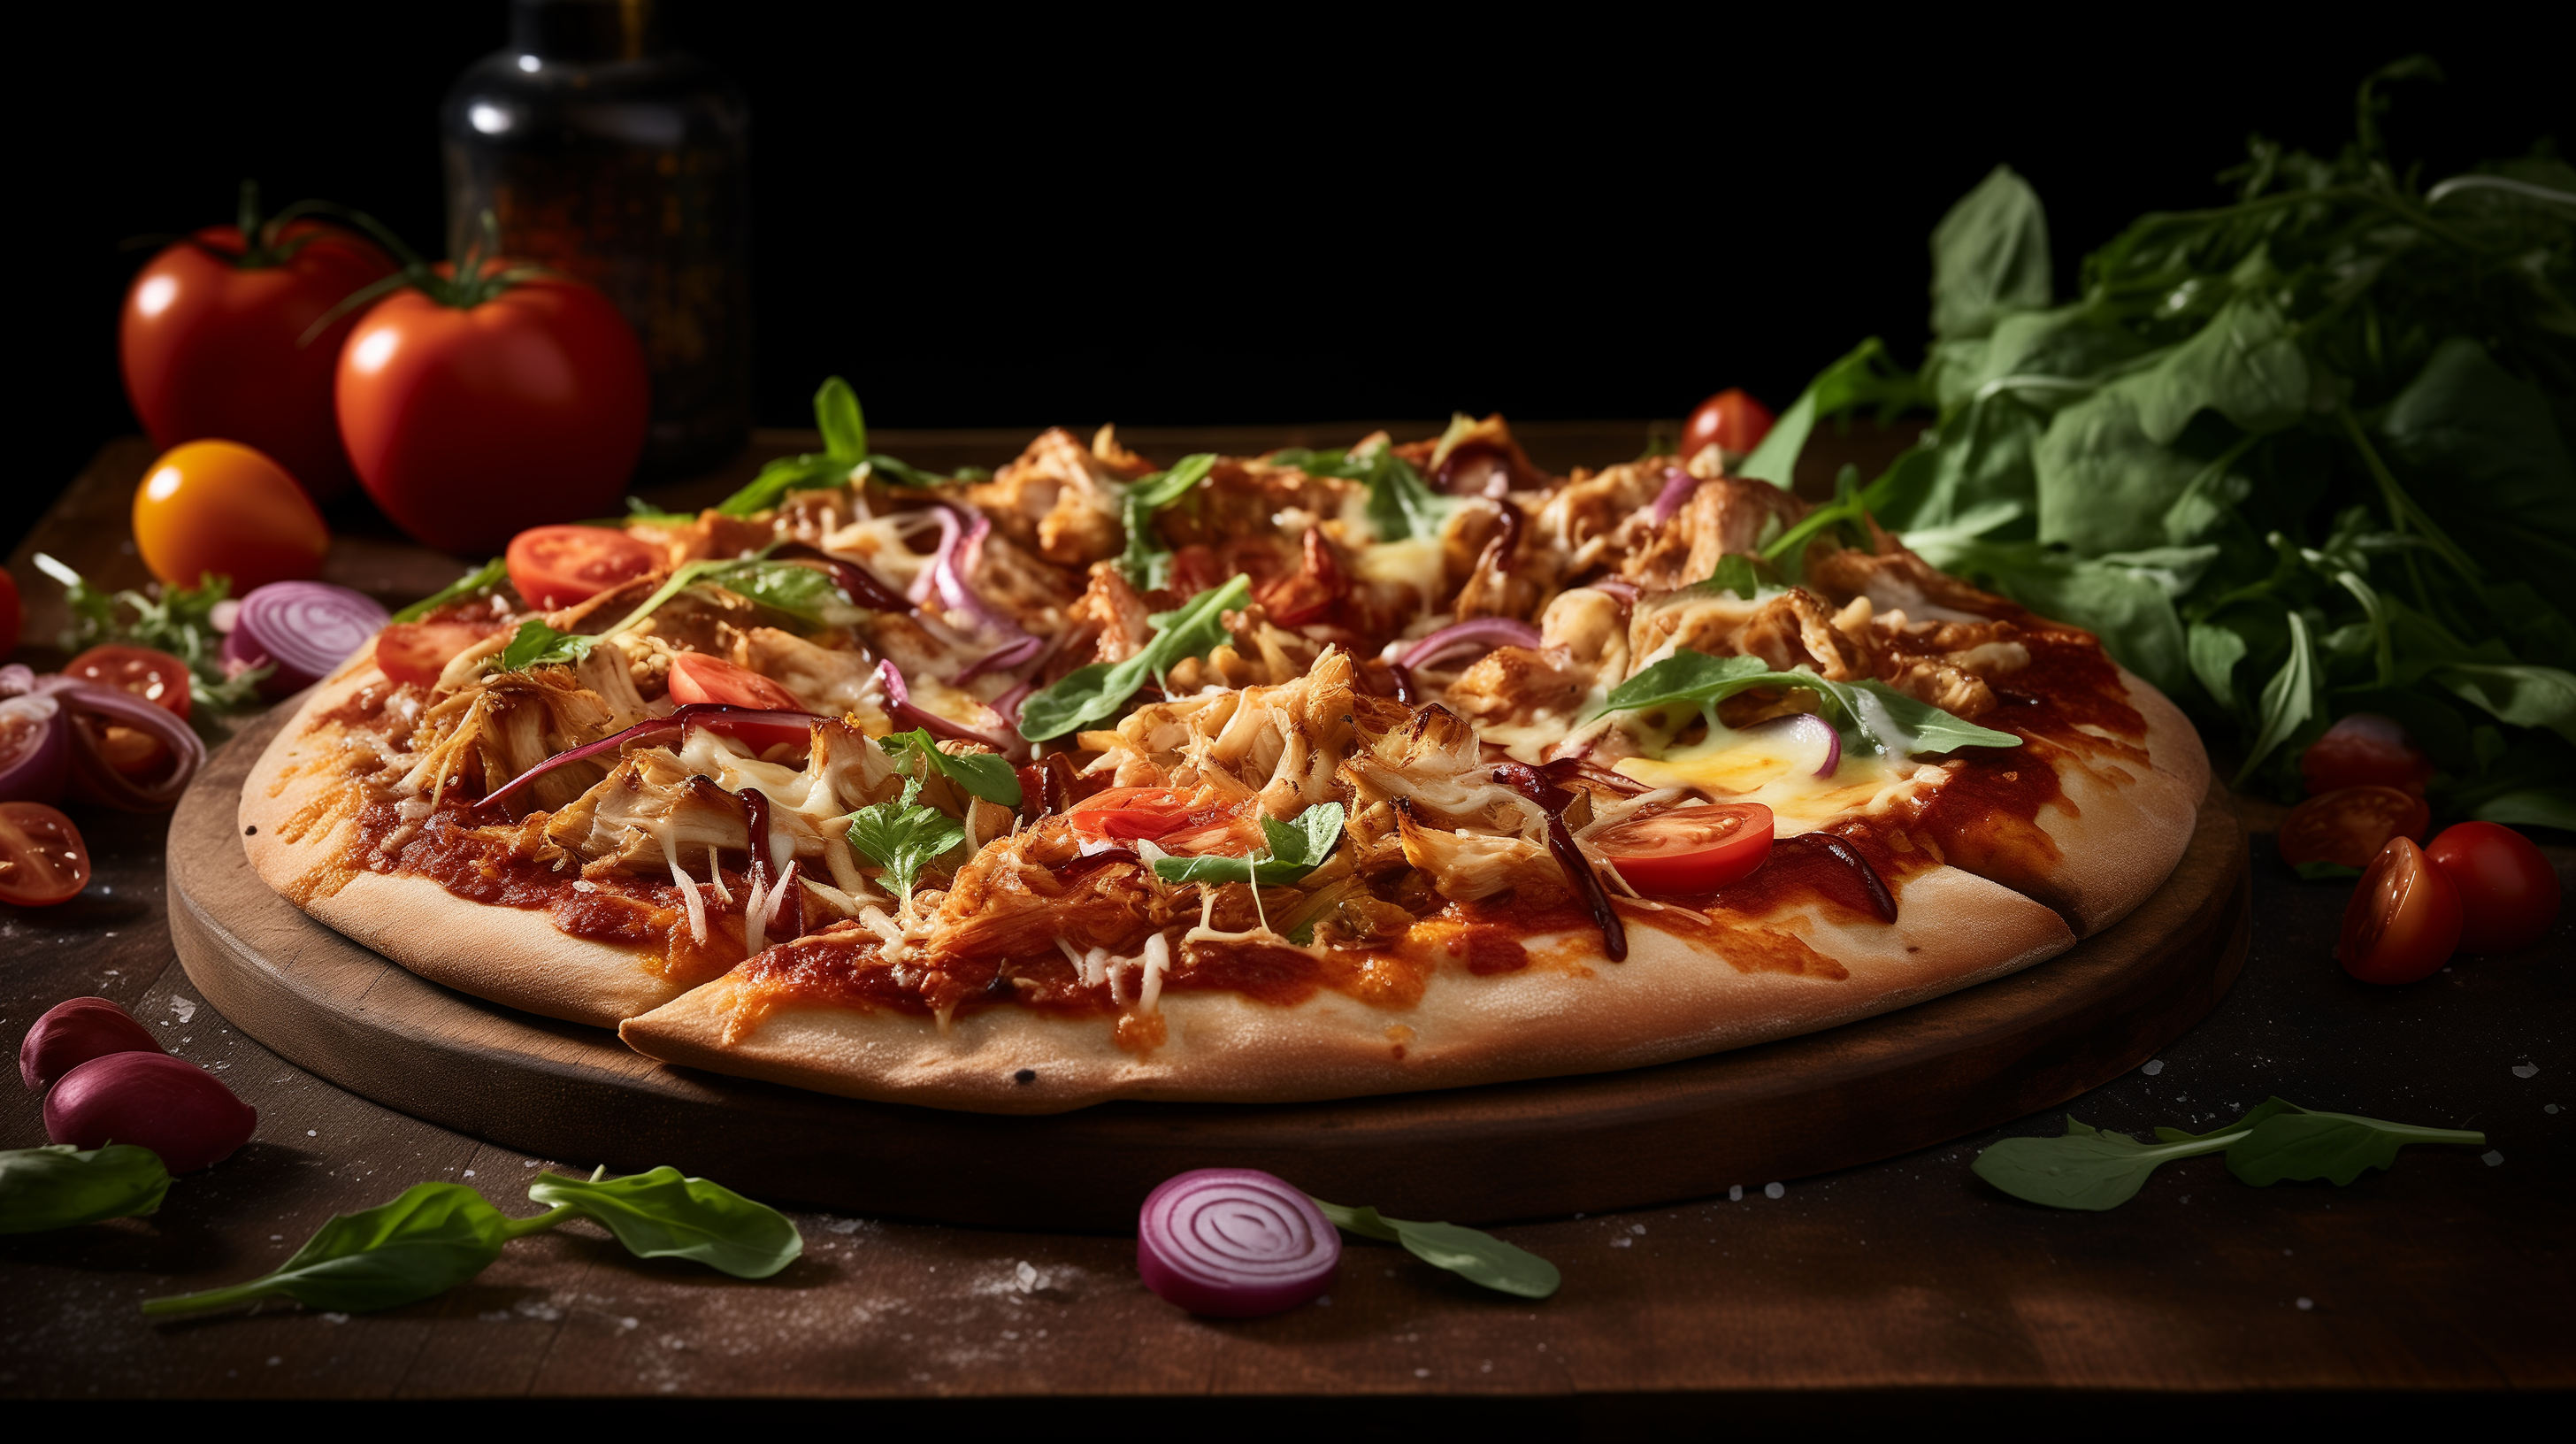 Image of a cherry-smoked BBQ chicken delight pizza.